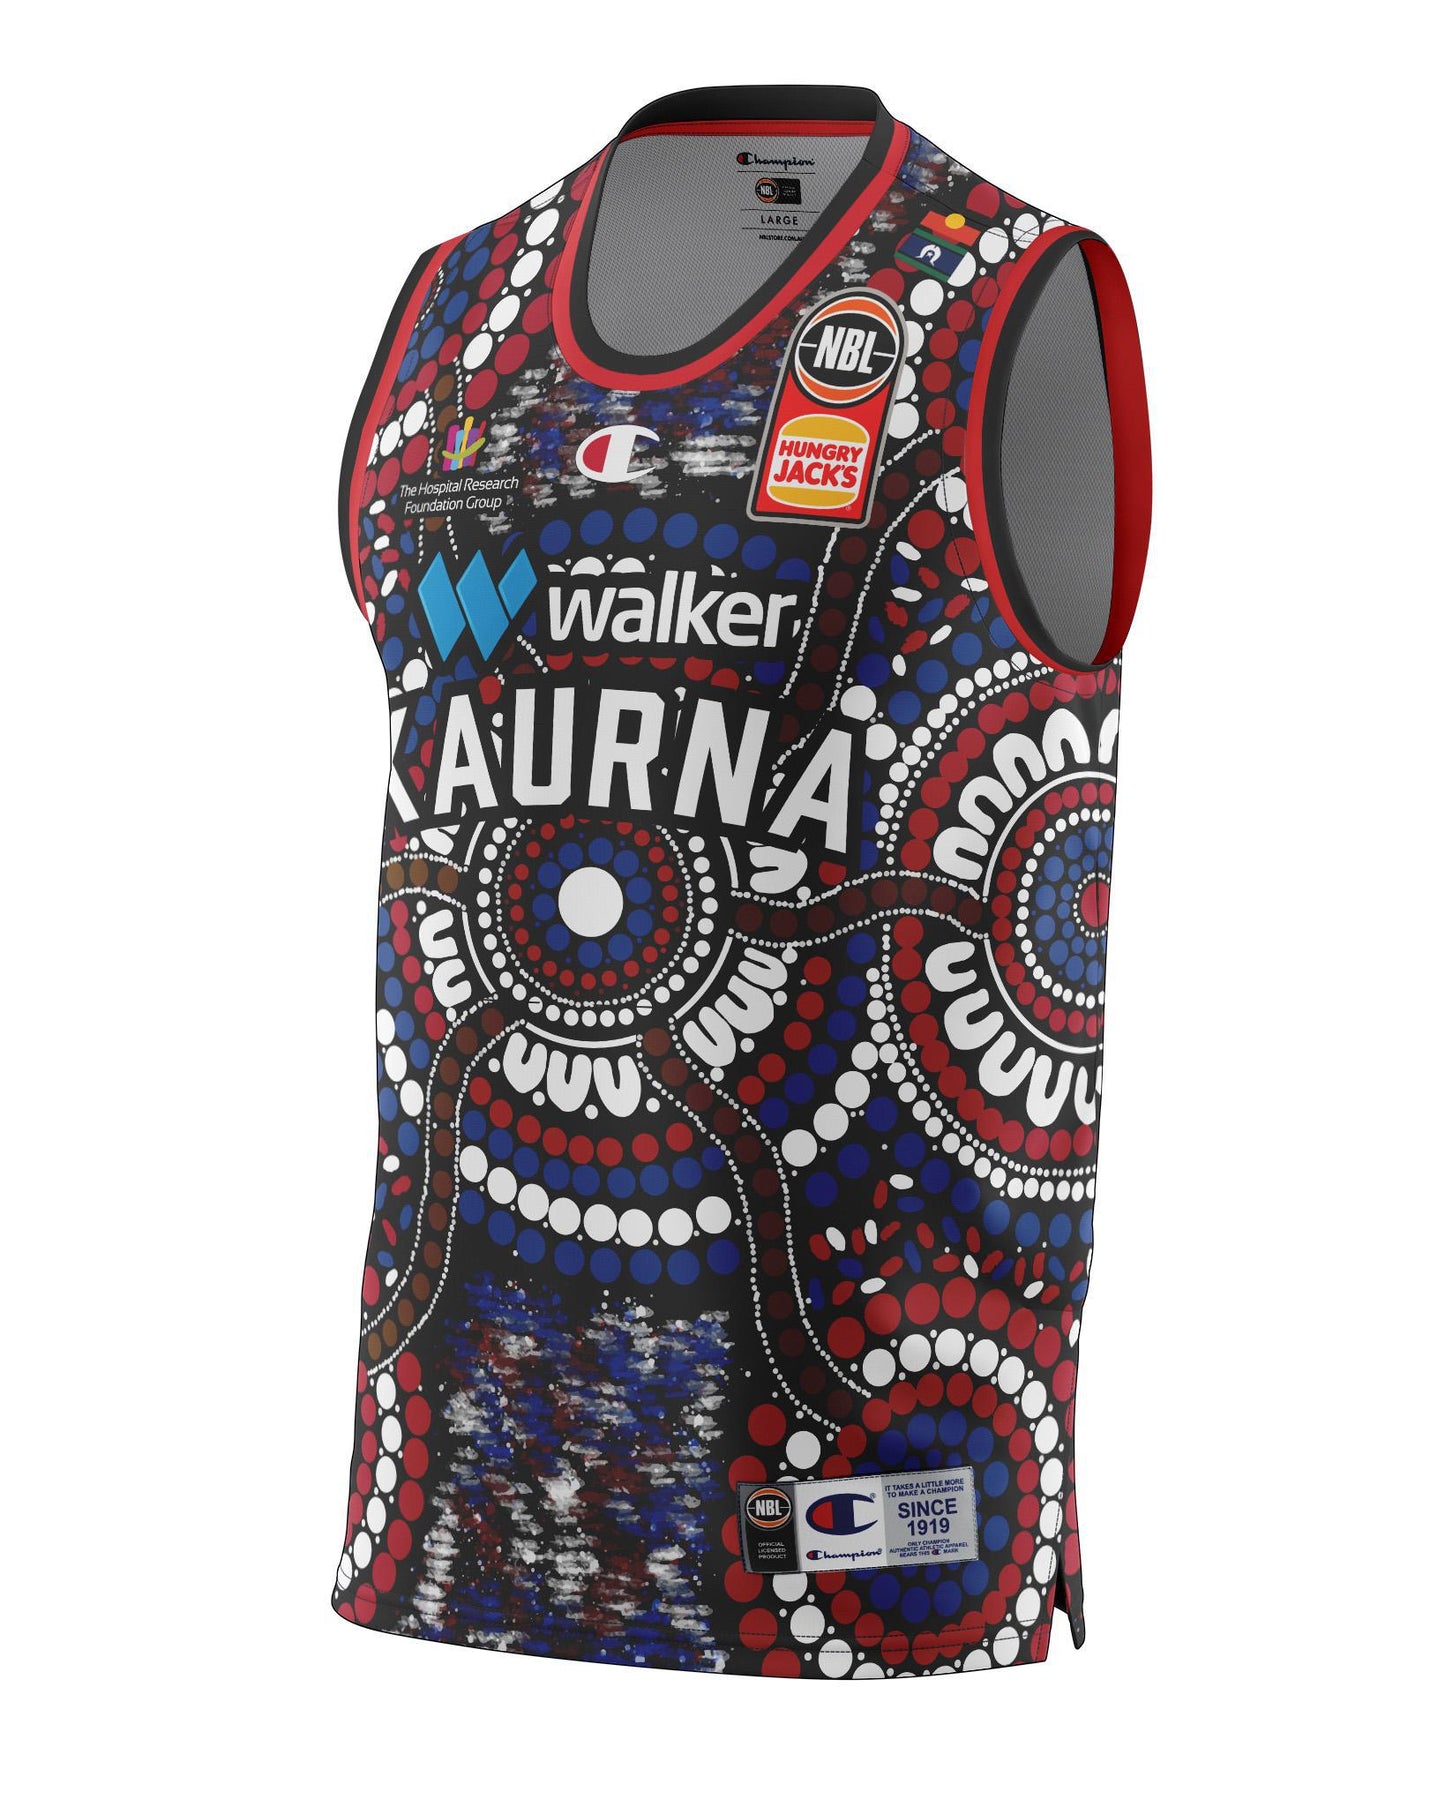 22/23 Adult Adelaide 36ers Indigenous Jerseys